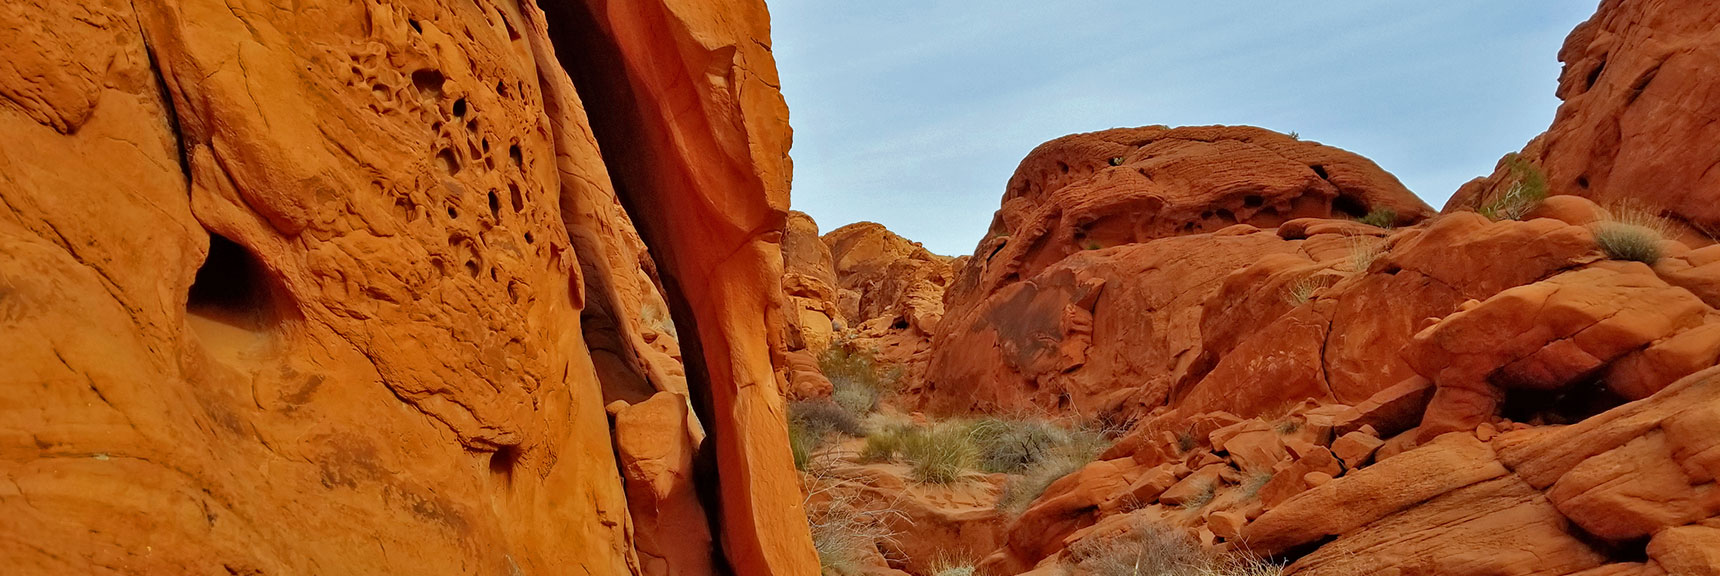 Weird Hanging Rock Formations in Fire Canyon in Valley of Fire State Park, Nevada